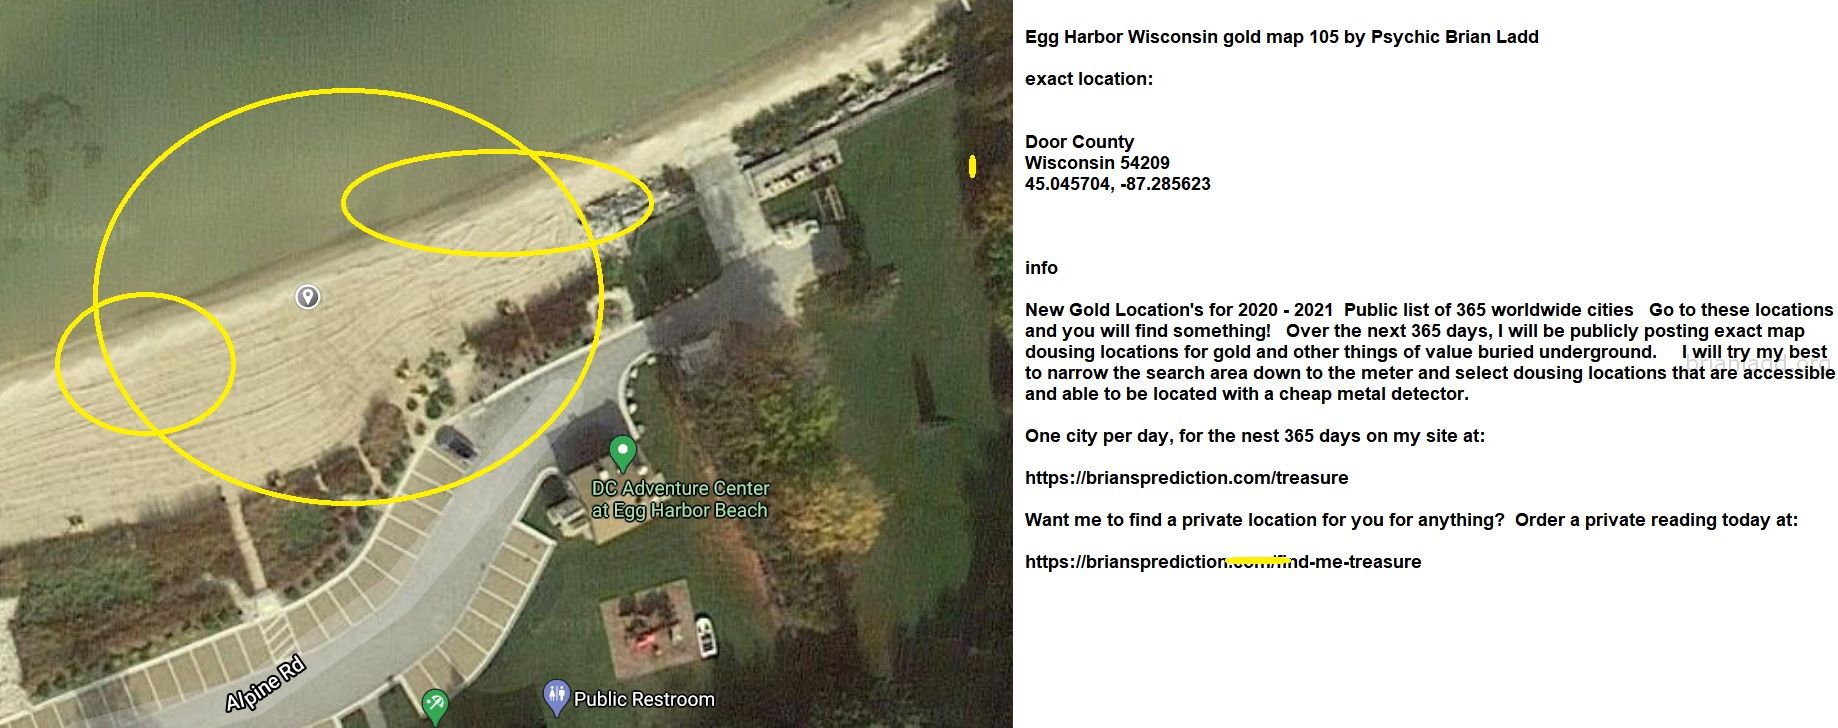 Egg Harbor Wisconsin gold map 105 by Psychic Brian Ladd
New Gold Location's for 2020 - 2021  Public list of 365 worldwide cities   Go to these locations and you will find something!   Over the next 365 days, I will be publicly posting exact map dousing locations for gold and other things of value buried underground.     I will try my best to narrow the search area down to the meter and select dousing locations that are accessible and able to be located with a cheap metal detector. One city per day, for the nest 365 days on my site at:  https://briansprediction.com/treasure  Want me to find a private location for you for anything?  Order a private reading today at:  https://briansprediction.com/find-me-treasure
